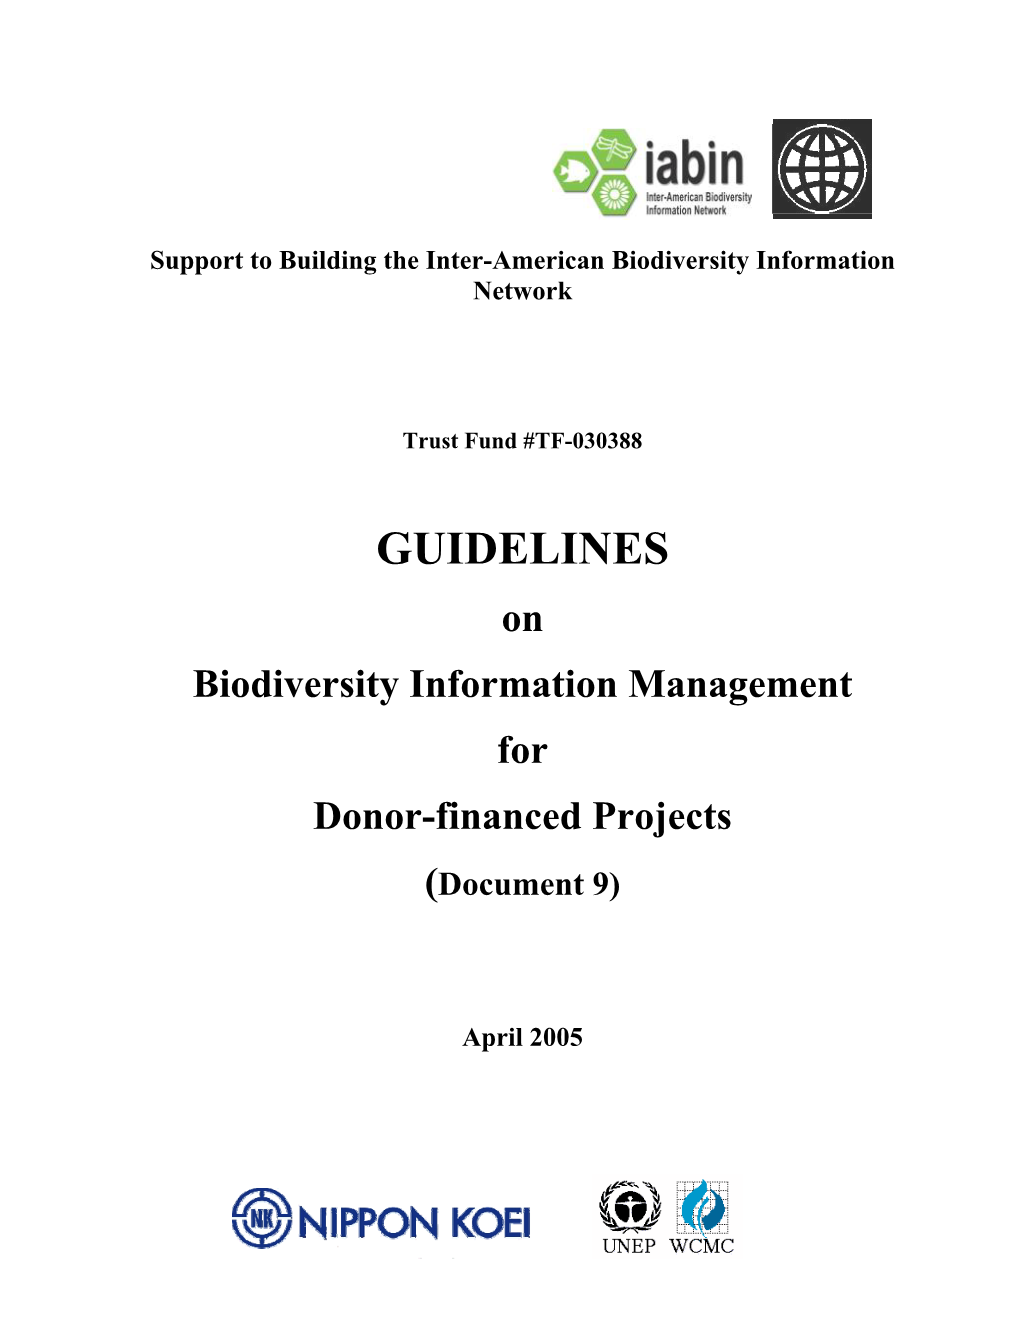 GUIDELINES on Biodiversity Information Management for Donor-Financed Projects (Document 9)